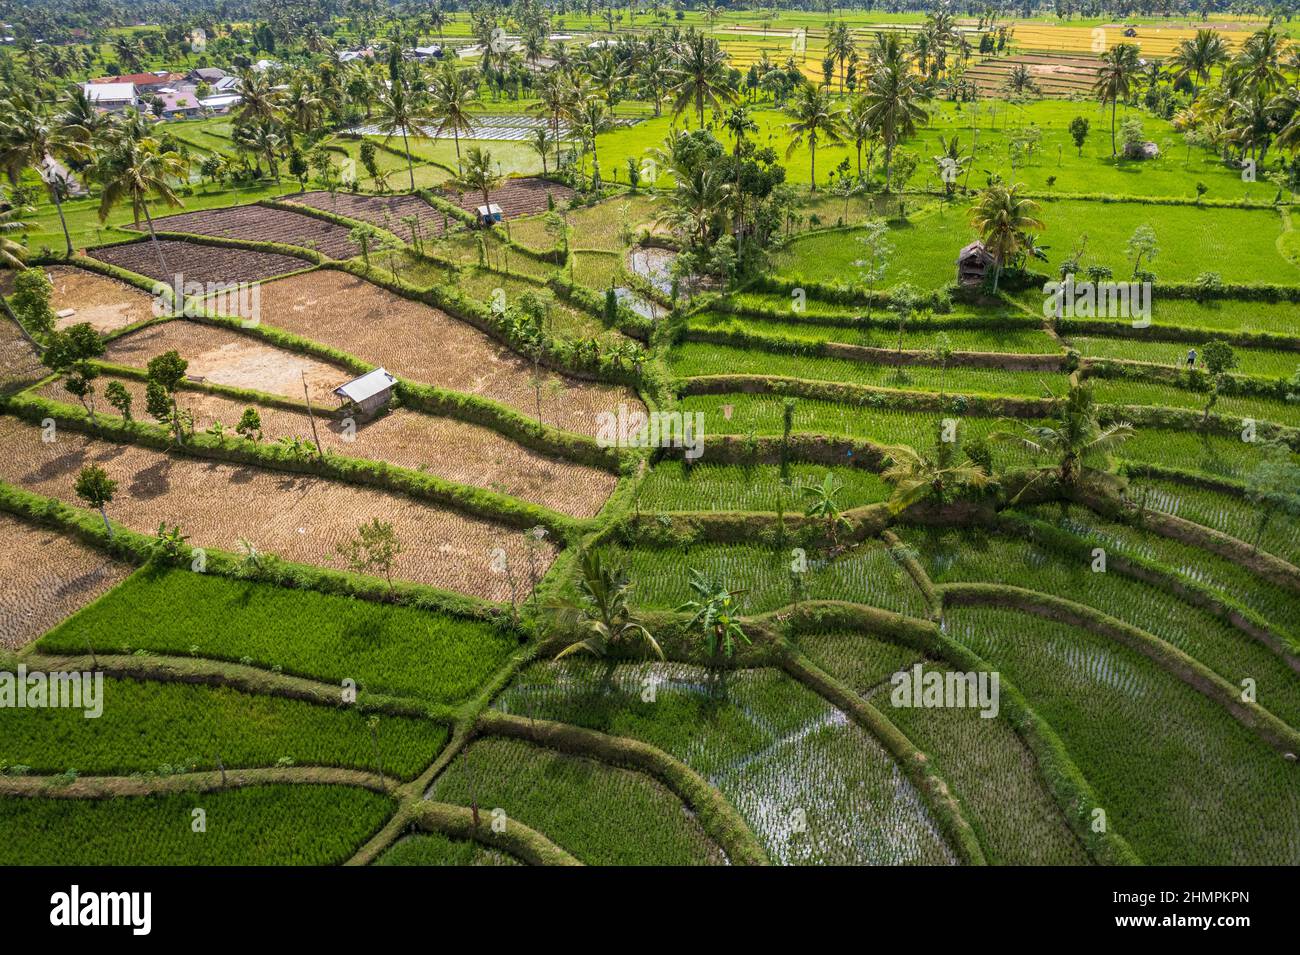 Aerial view of tropical rice fields, Lombok, Indonesia Stock Photo